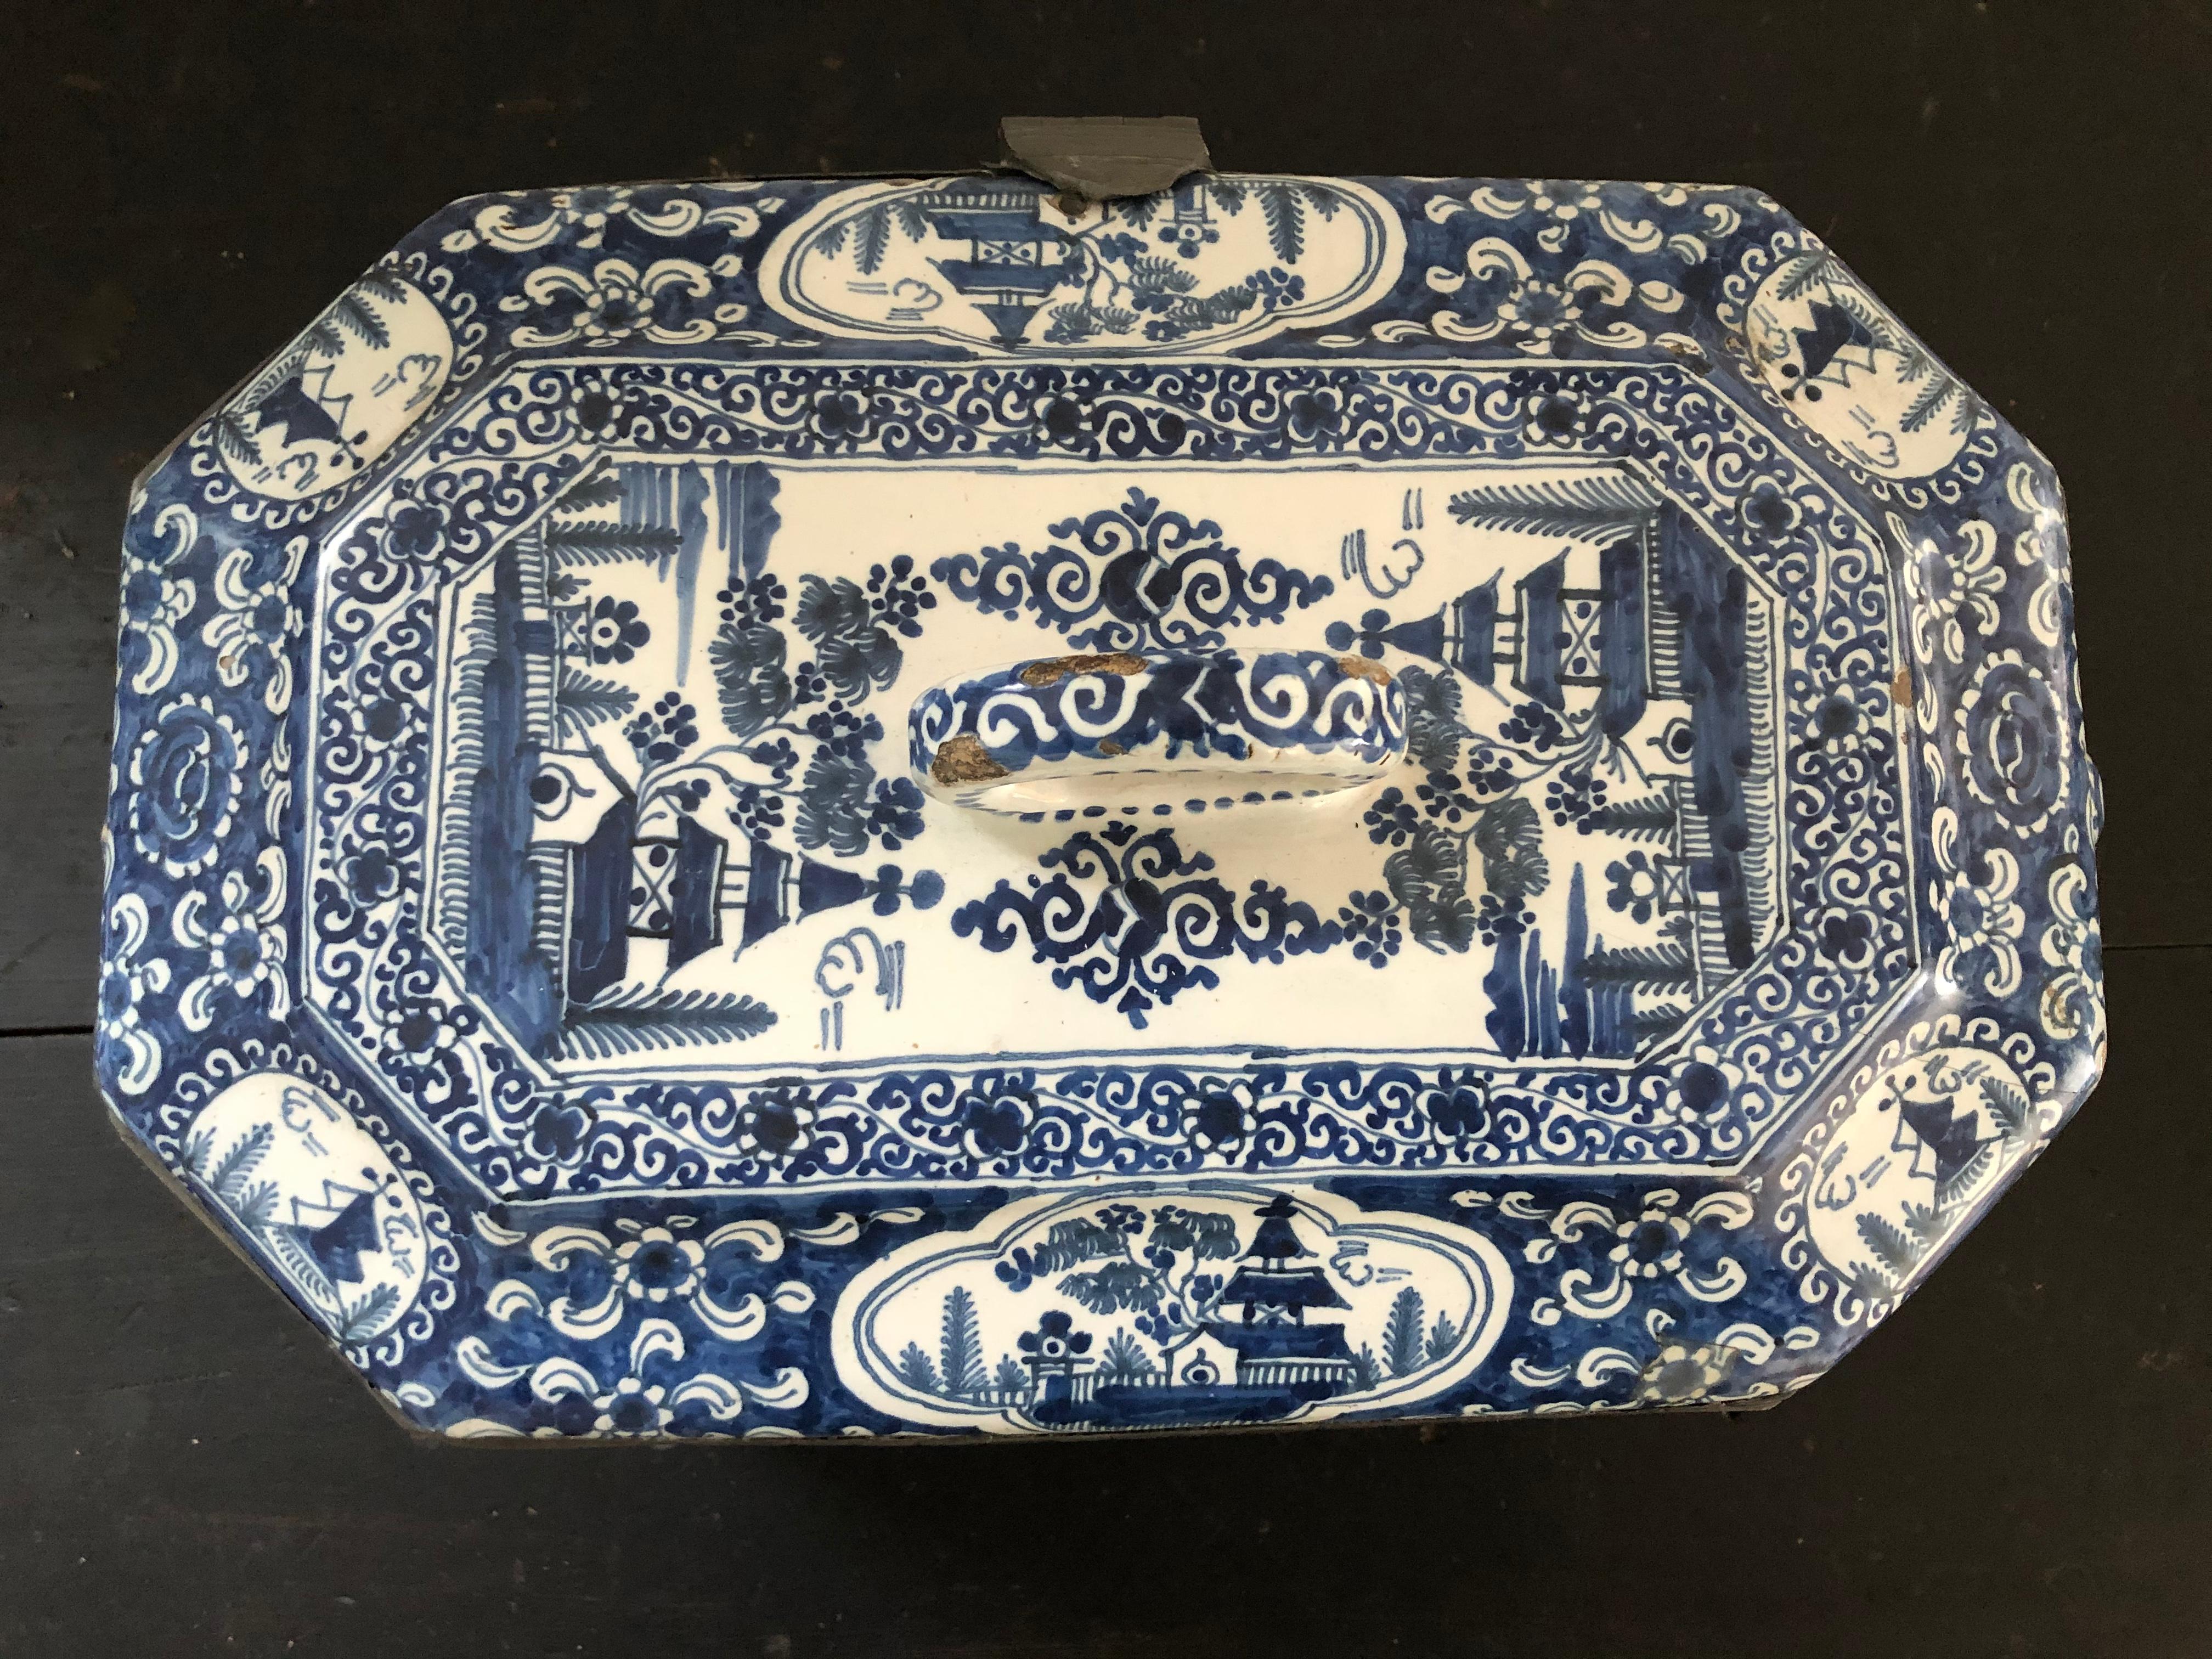 A generously proportioned 18th century hand painted blue and white Delft pottery box, of rectangular form with cut corners, the two ends with circular strap handles, the domed top with loop strap handle. The edges of the box where the top and bottom